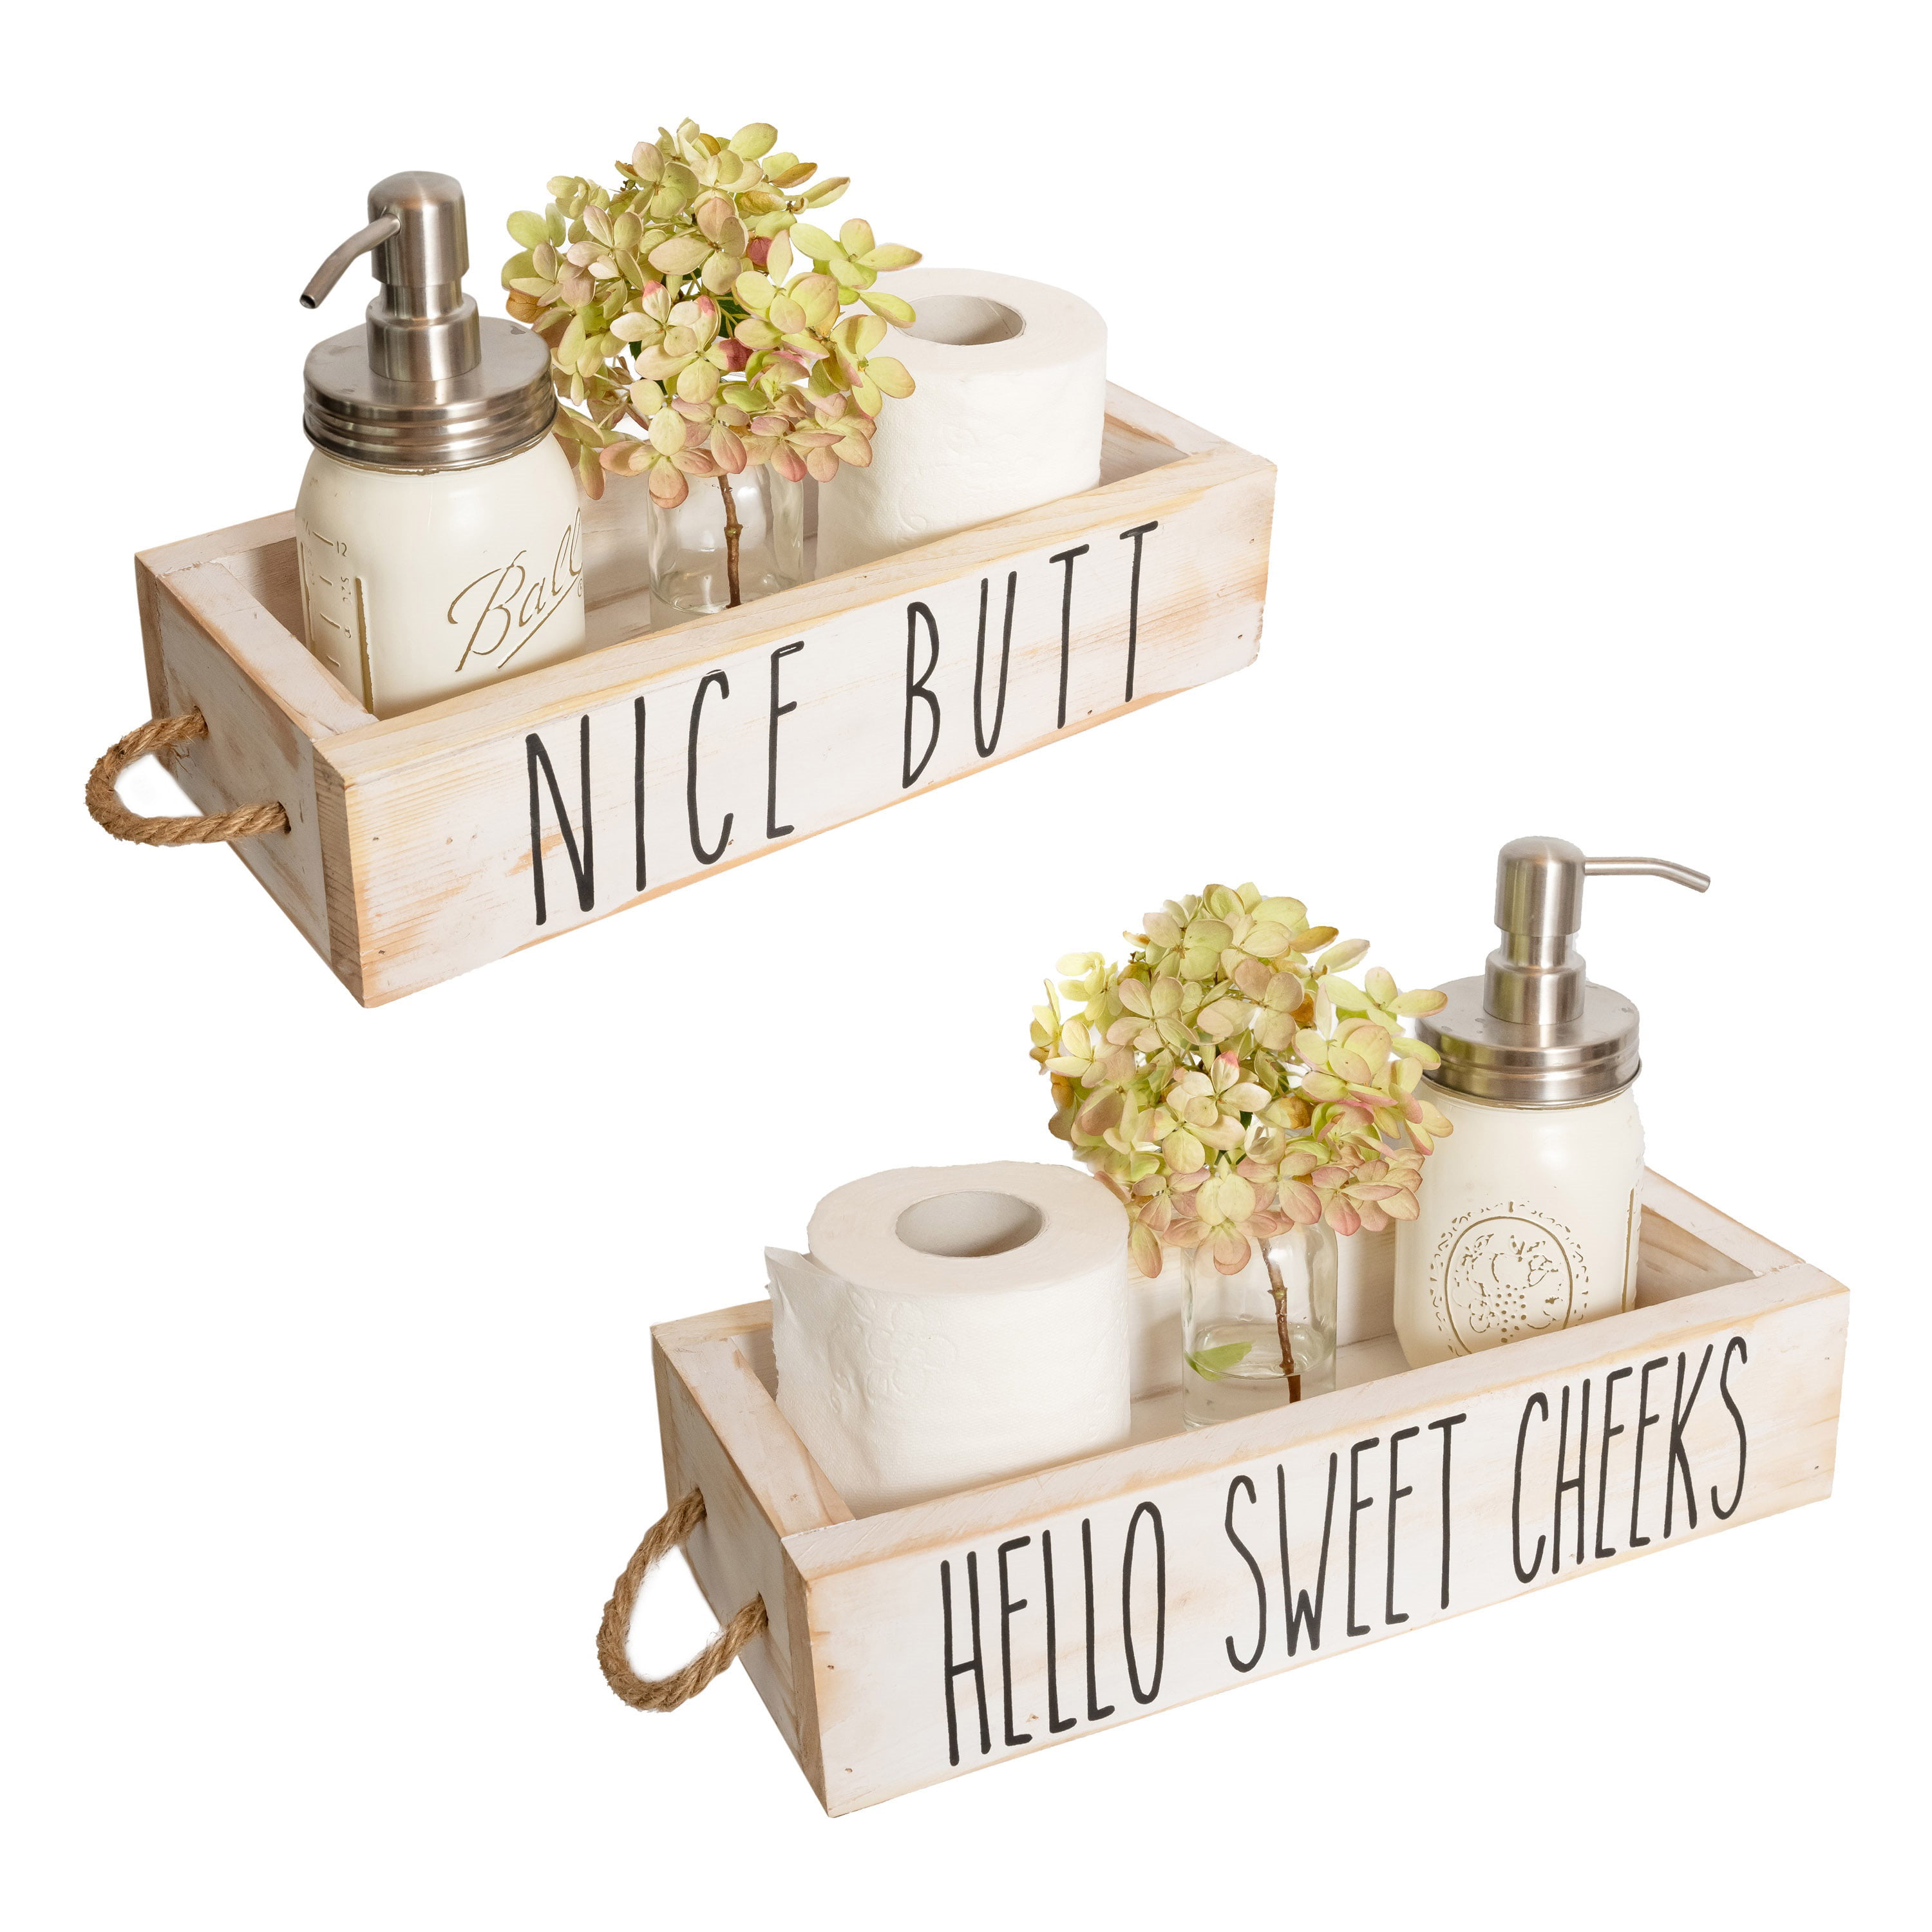 White Ruiuzioong Bathroom Decor Box 2 Sides with Funny Sayings Funny Toilet Paper Holder Perfect for Farmhouse Bathroom Decor Toilet Paper Storage Rustic Bathroom Decor Diaper Organizer 